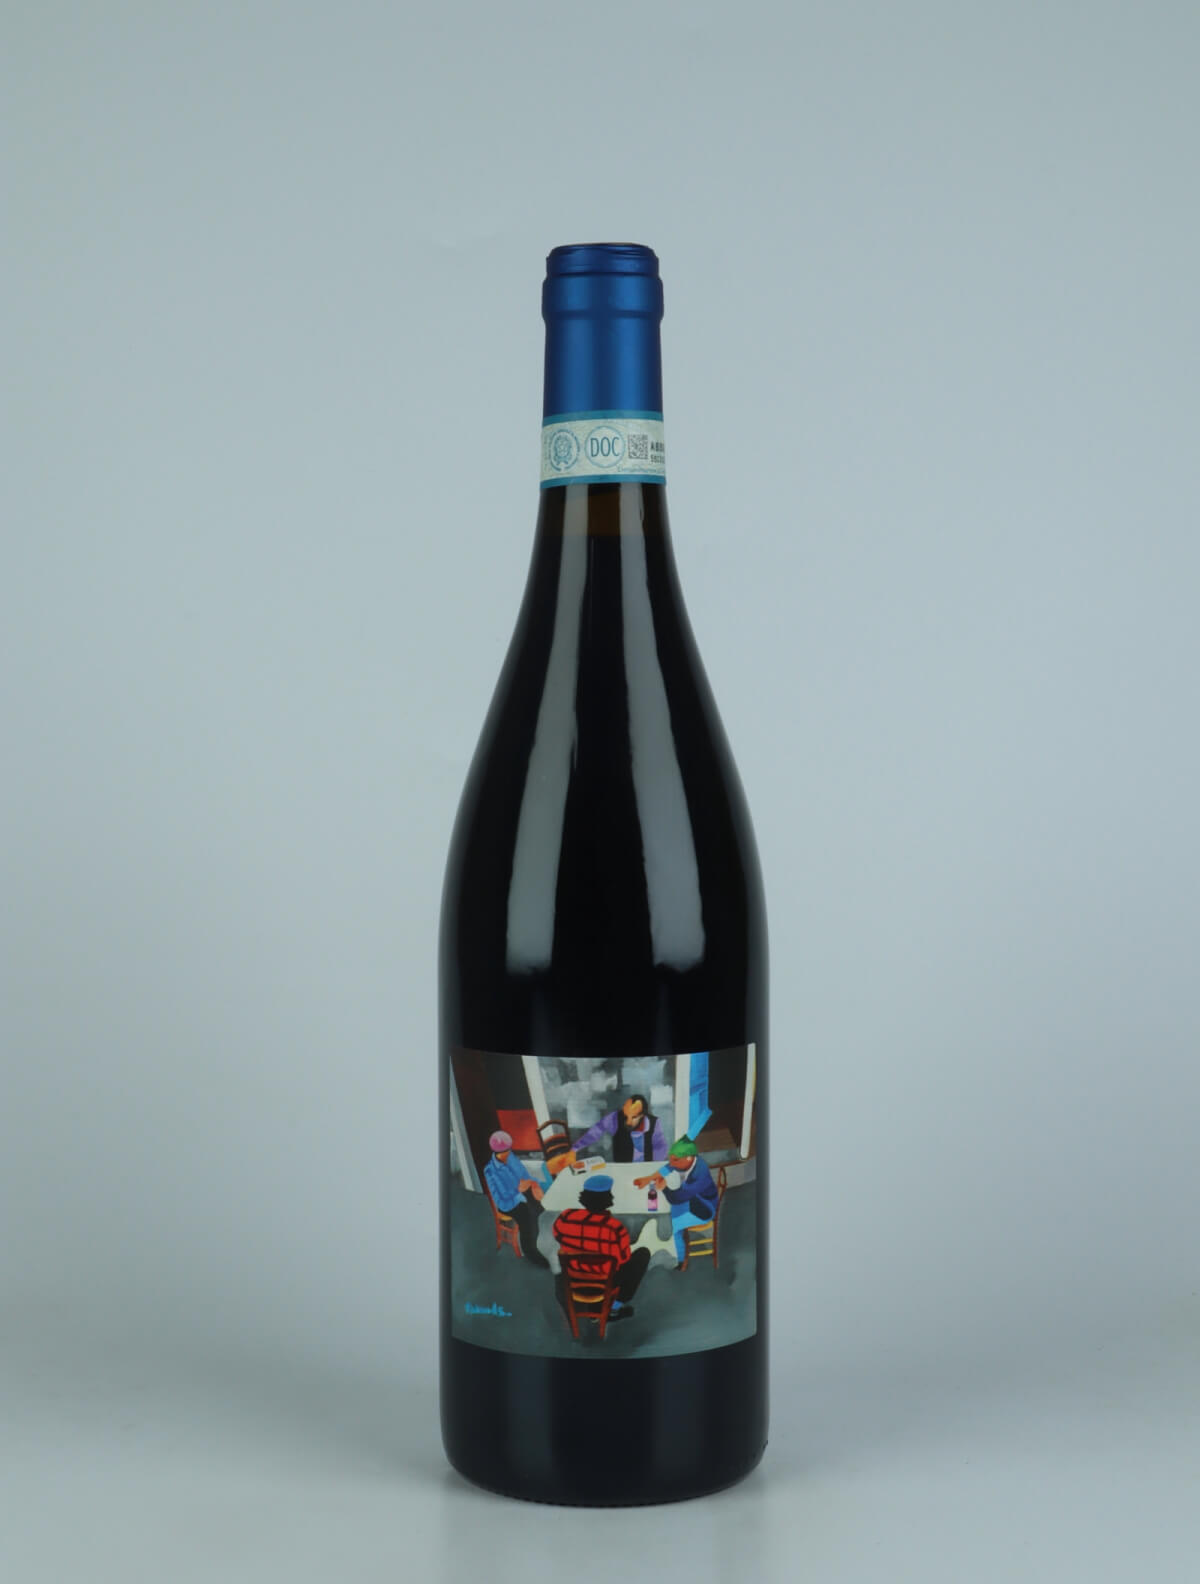 A bottle 2020 Freisa d'Asti Red wine from Andrea Scovero, Piedmont in Italy